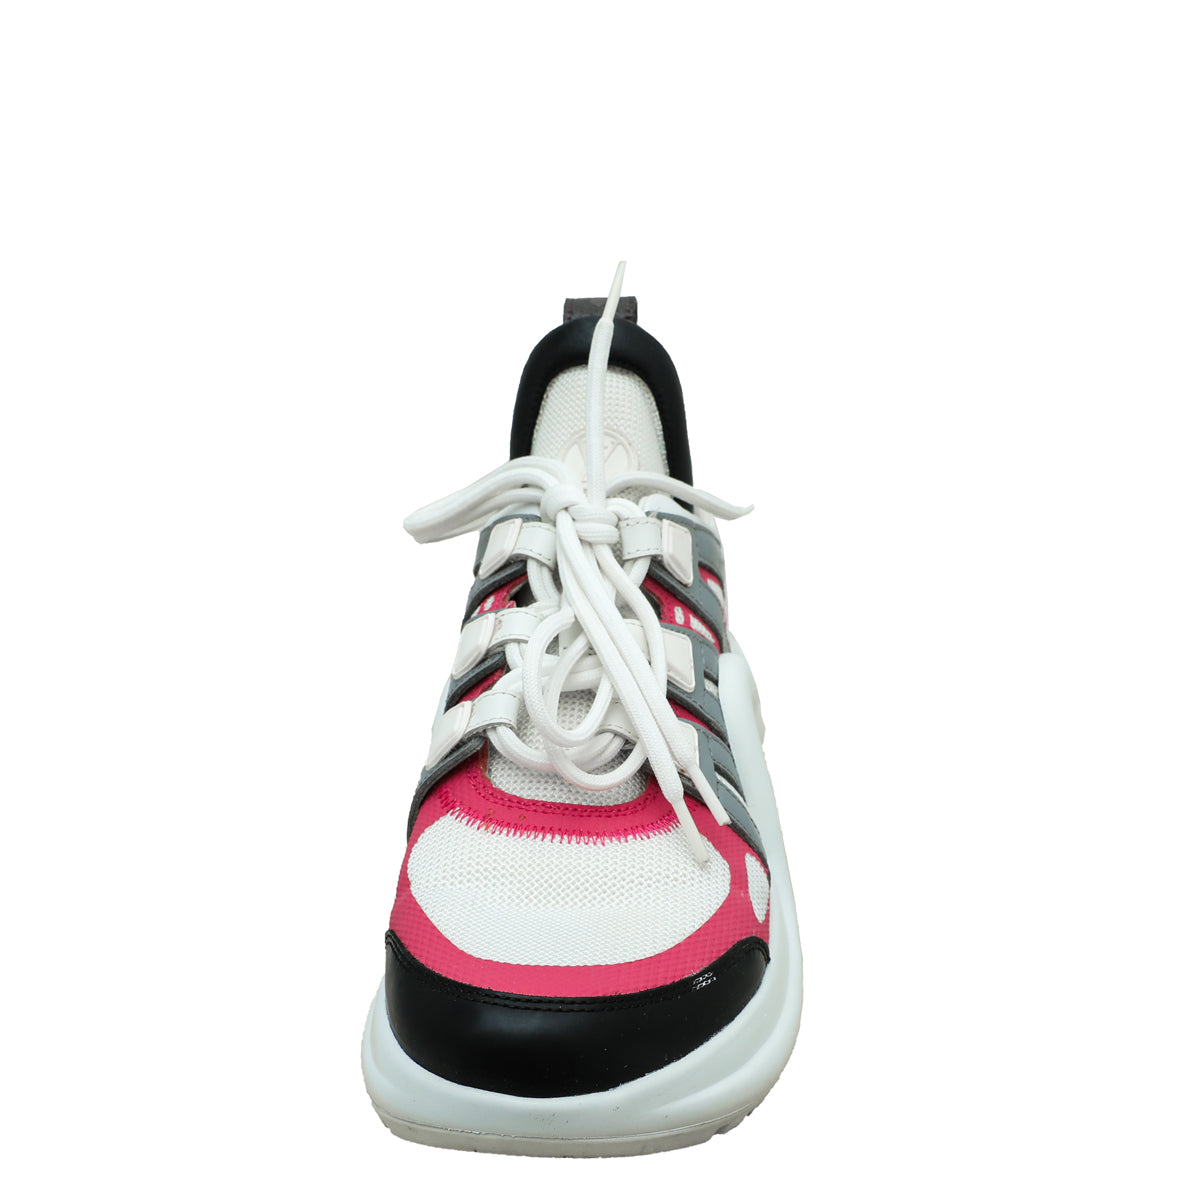 Louis Vuitton Multicolor Leather And Mesh Archlight Sneakers Size